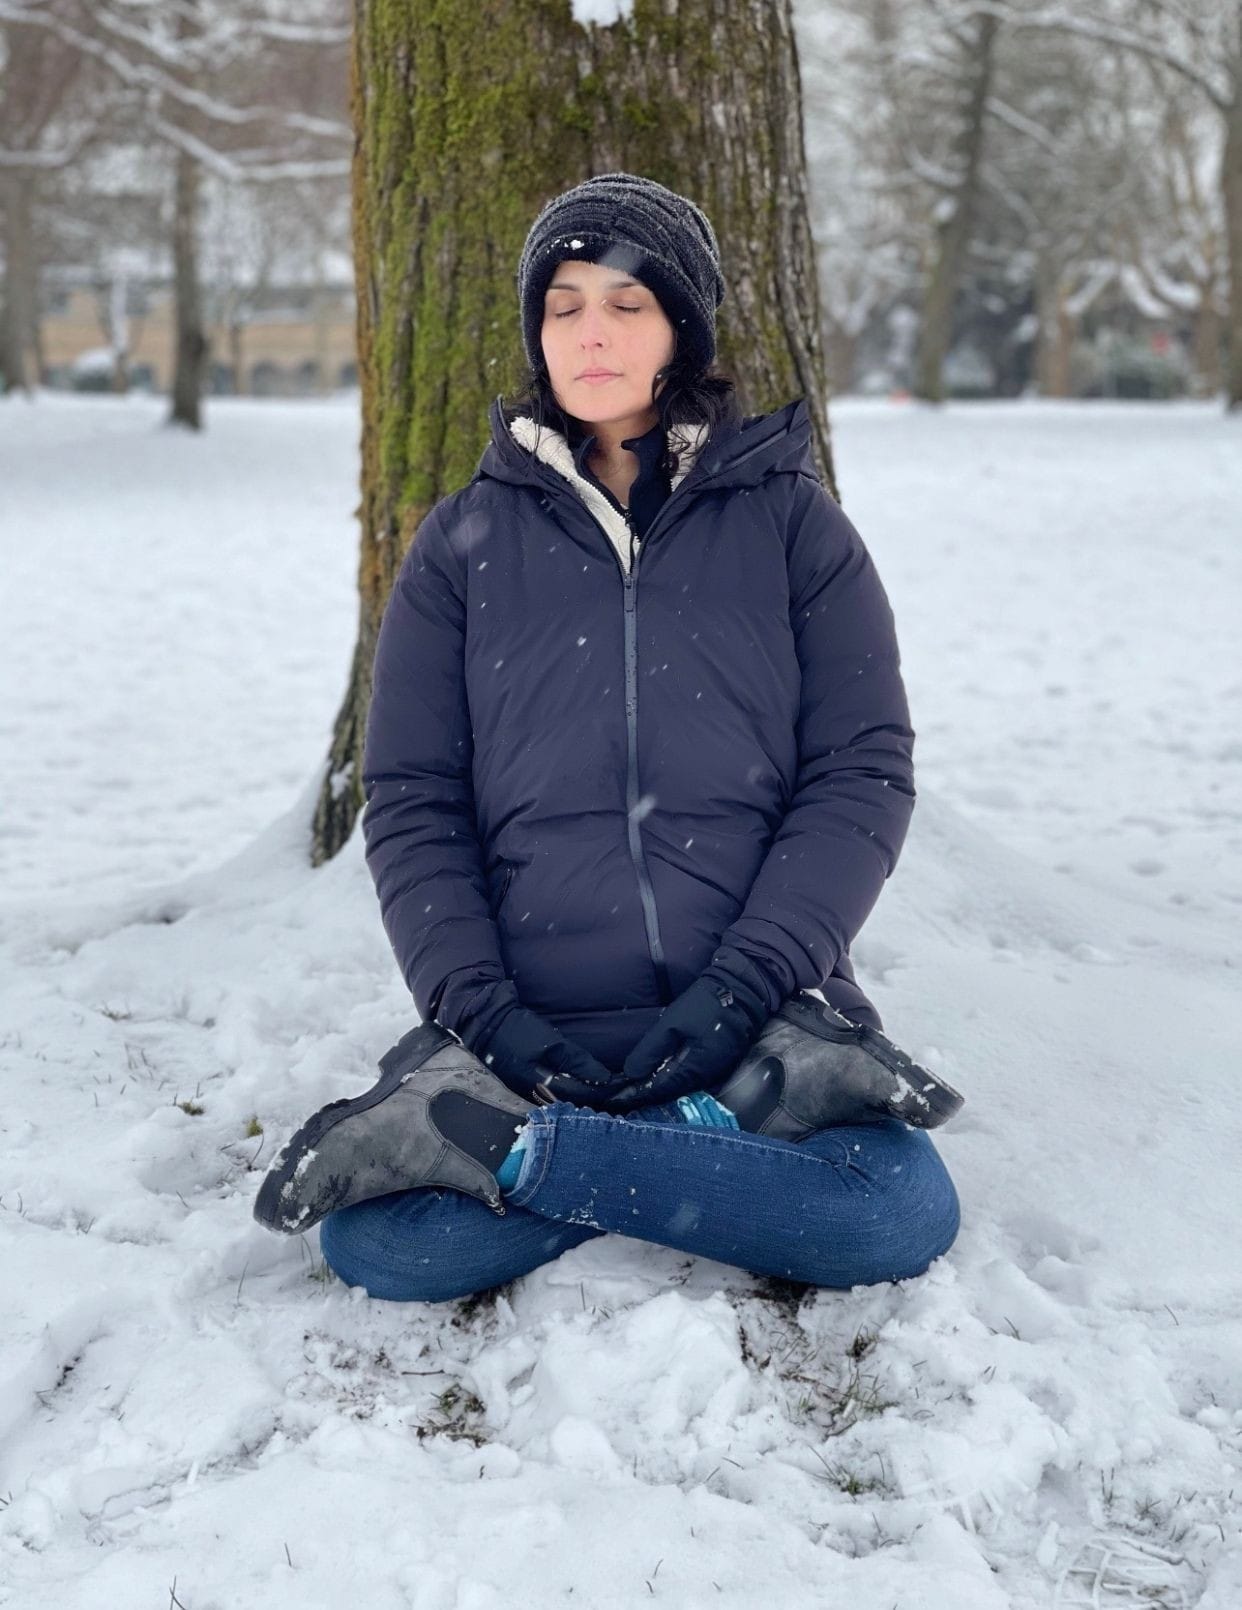 Tulip Joshi Sitting on Ground Covered with Snow